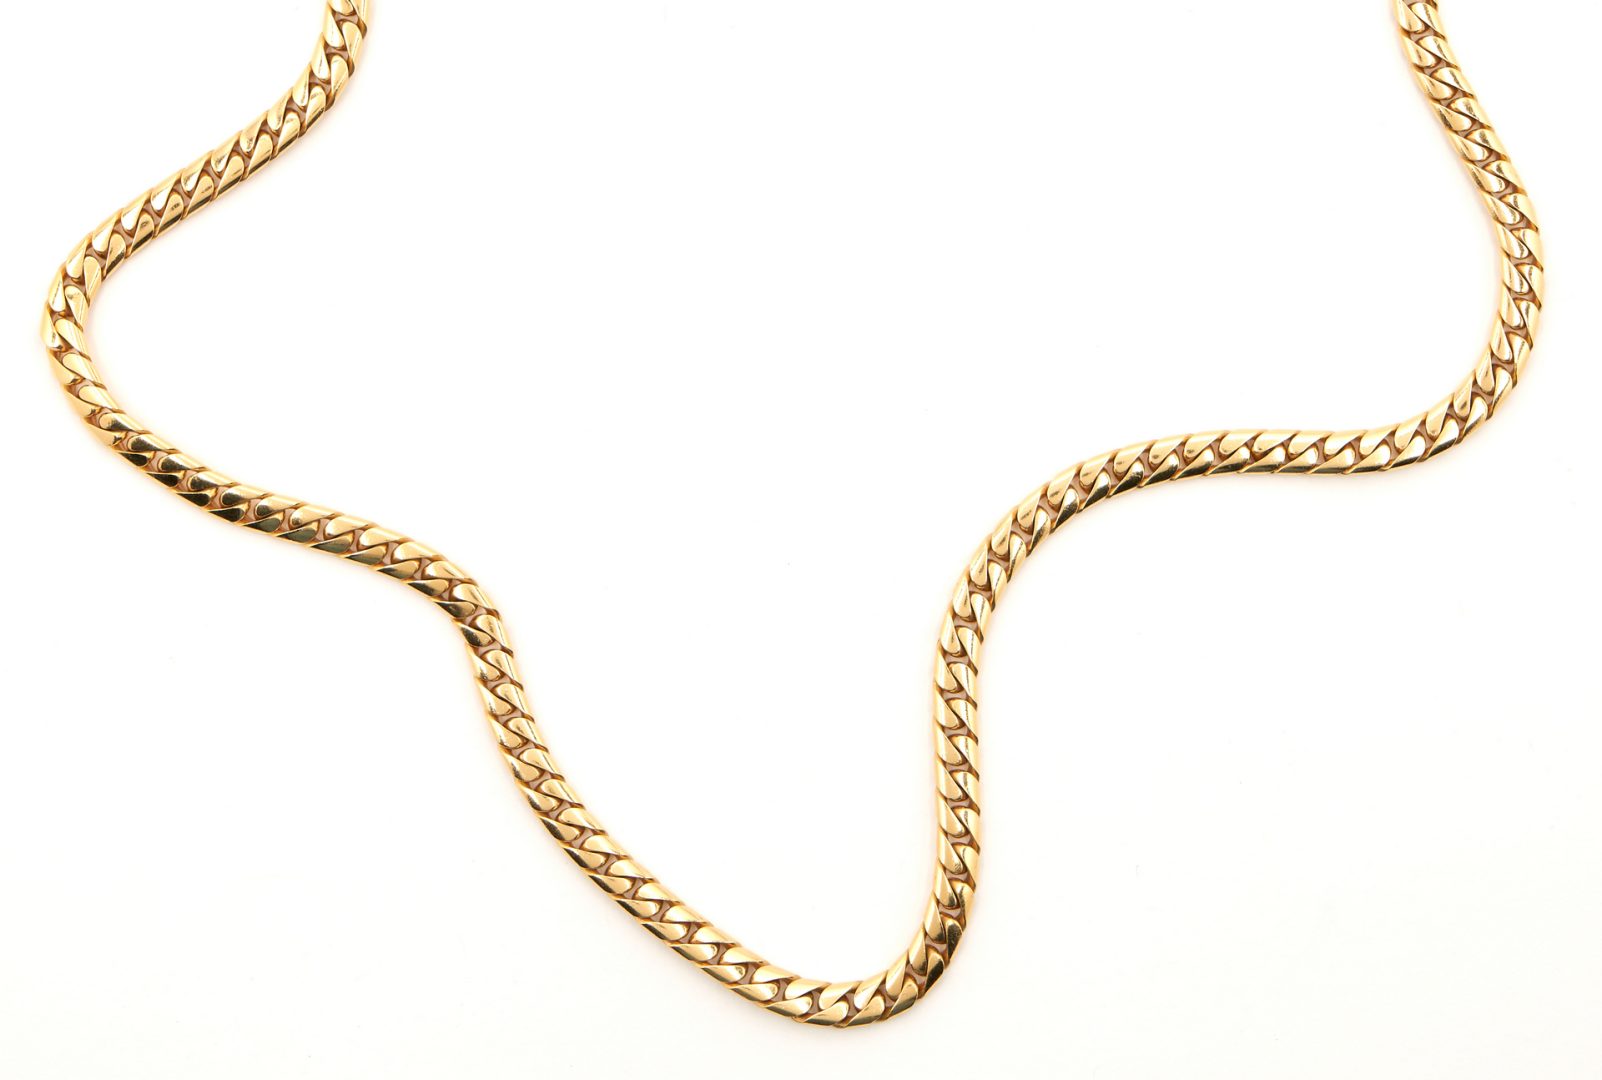 Lot 19: 18K Gold Chain Necklace